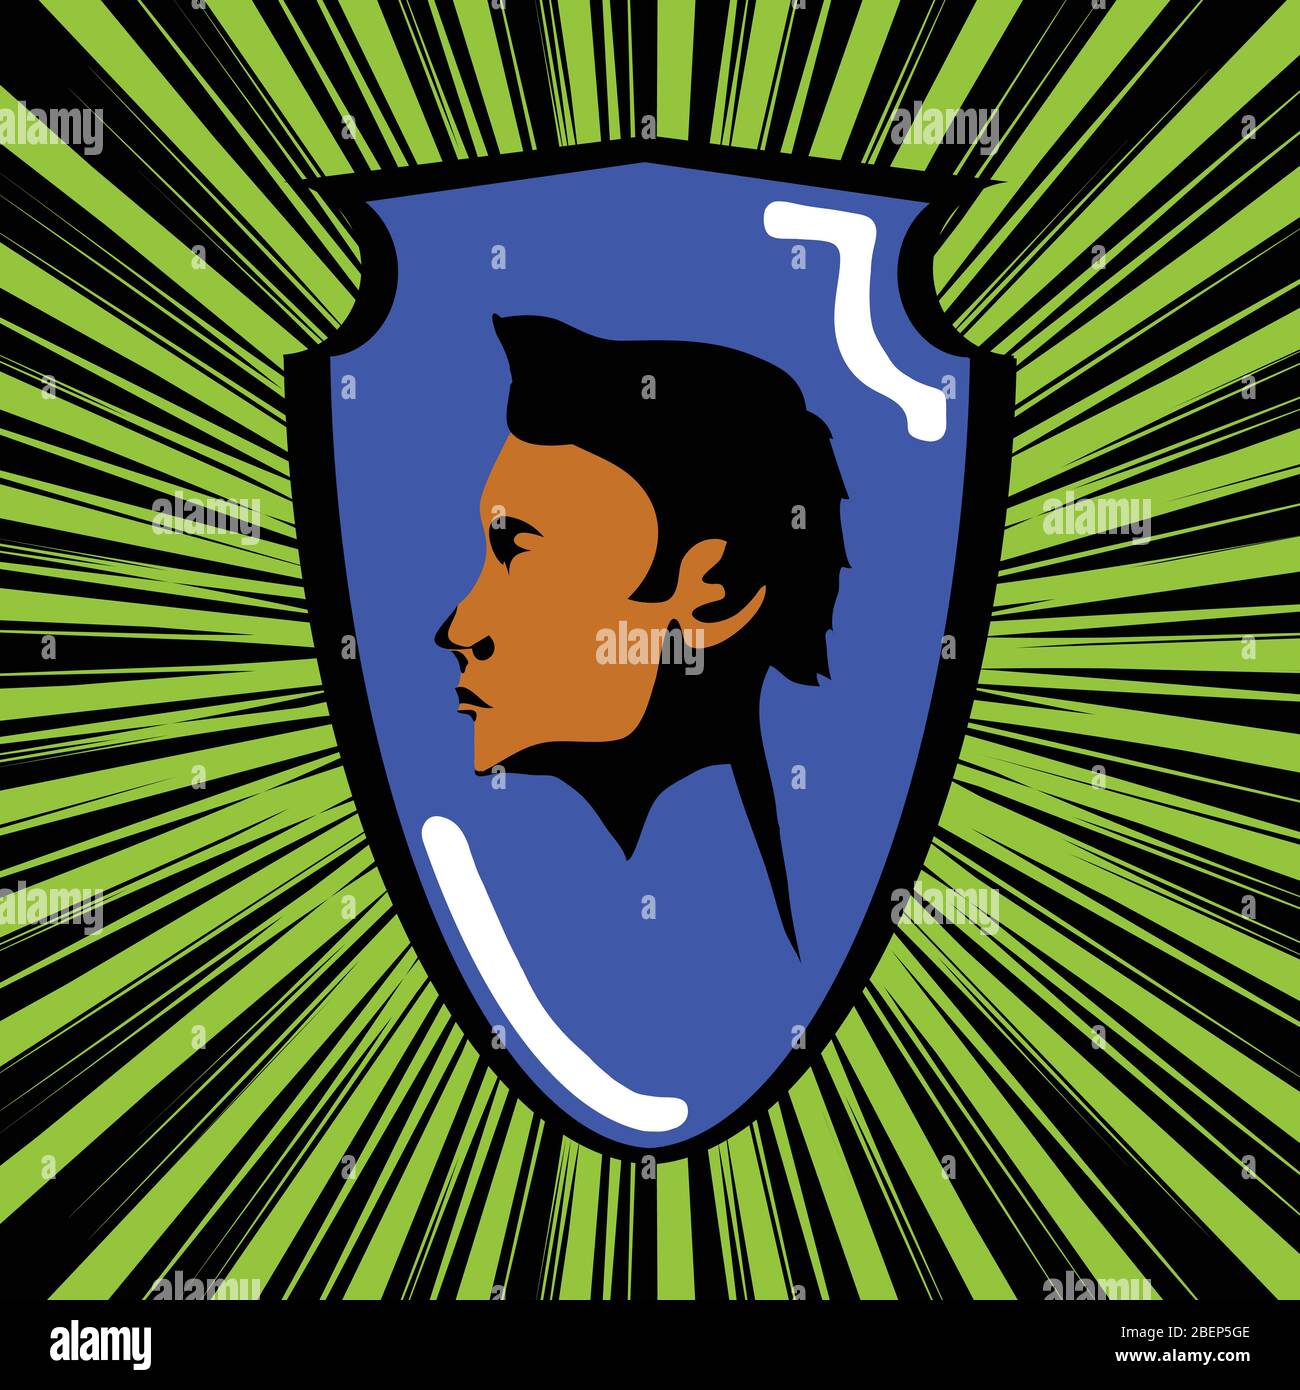 Retro Vintage Comics Cartoons Style Blue Shield With Black And Brown Male Head Over Green Star Burst On Black Background Stock Vector